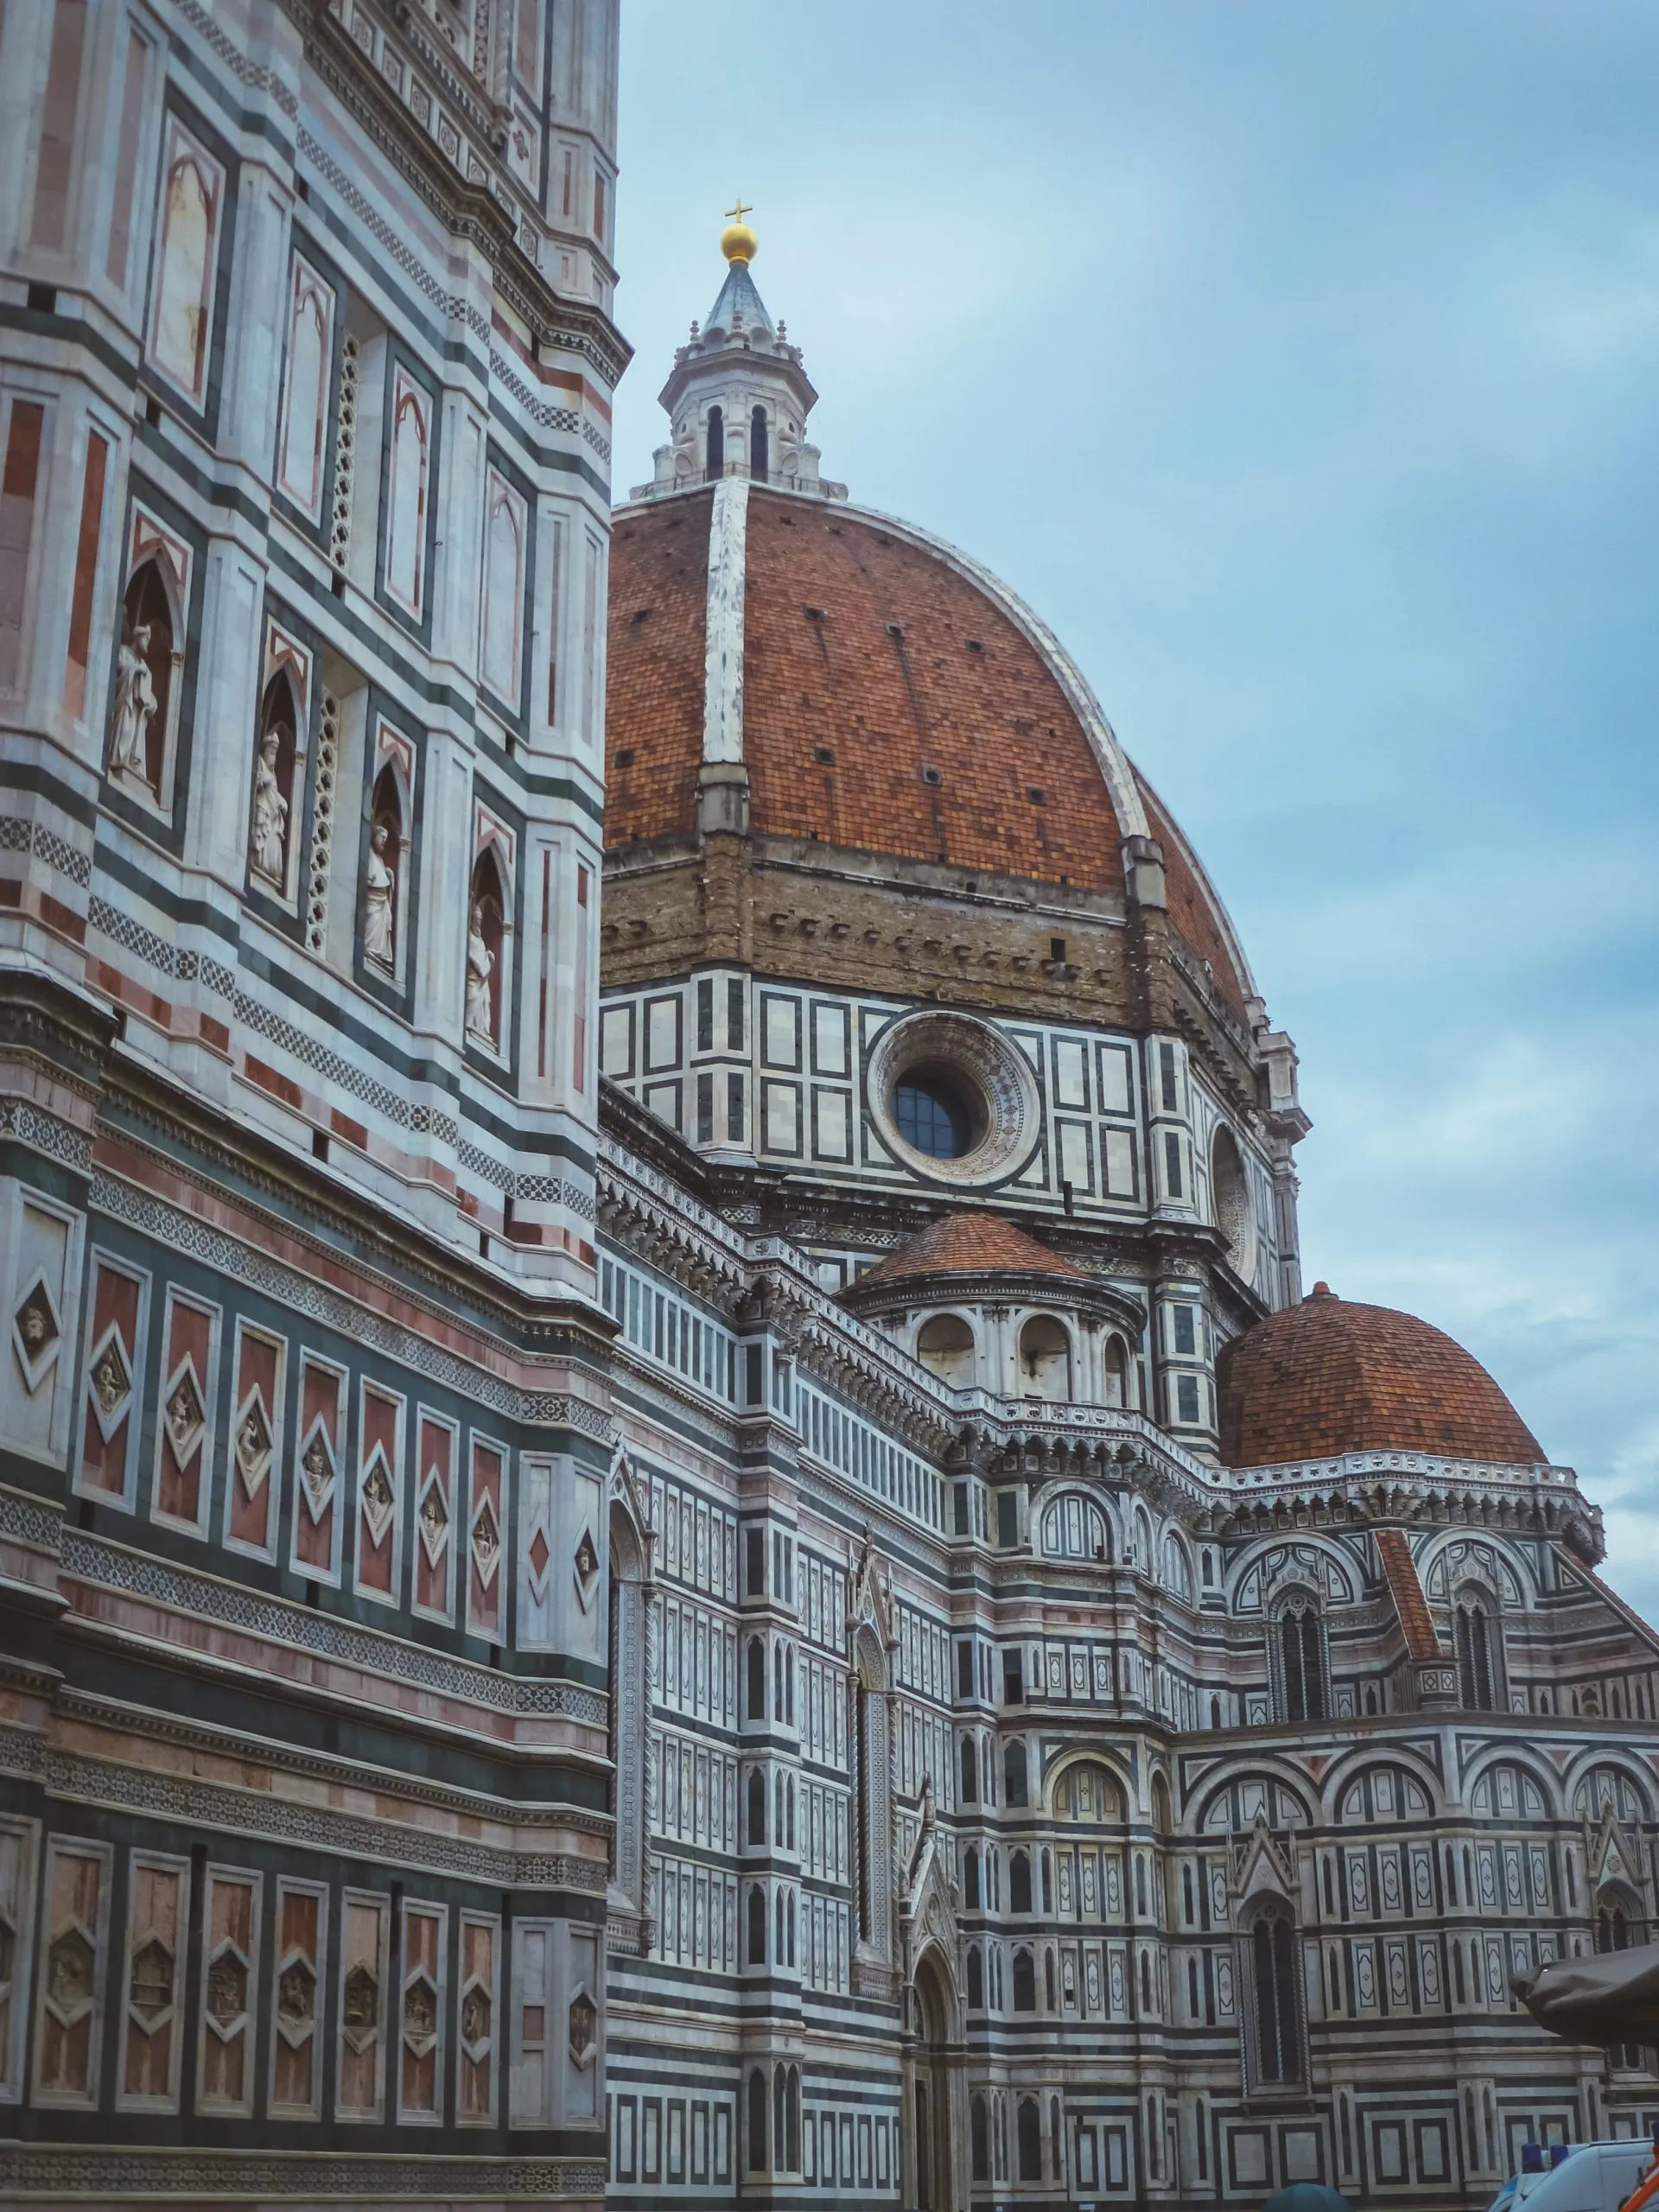 Florence Duomo. Beautiful Cathedral basilica in Tuscany, Italy